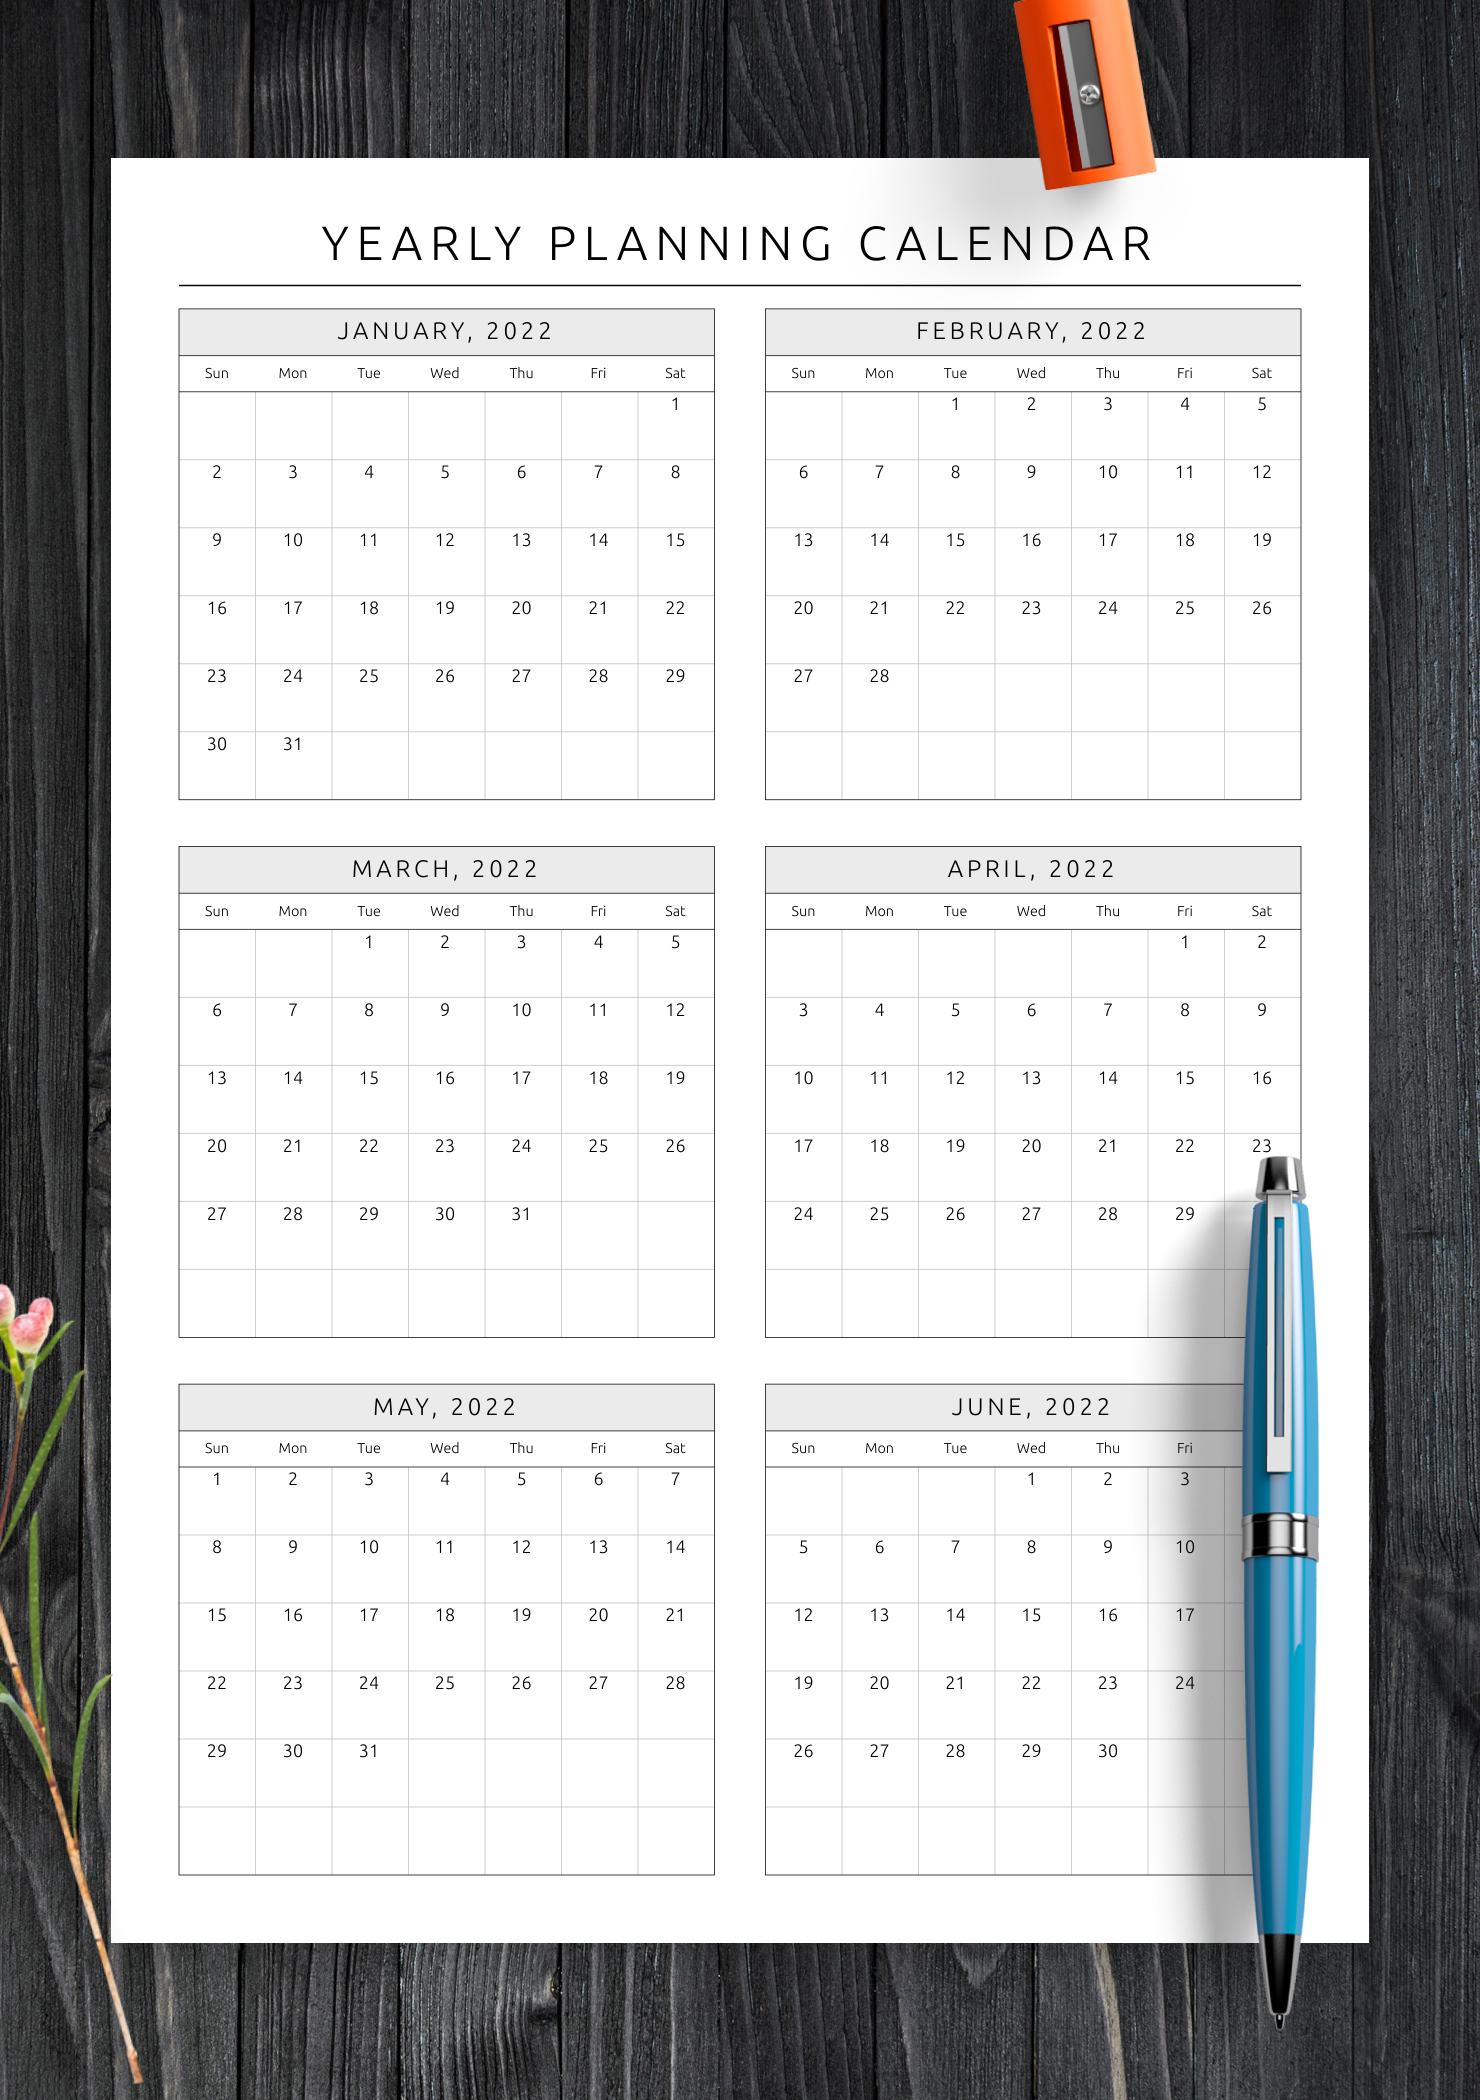 download-printable-yearly-planning-calendar-template-pdf